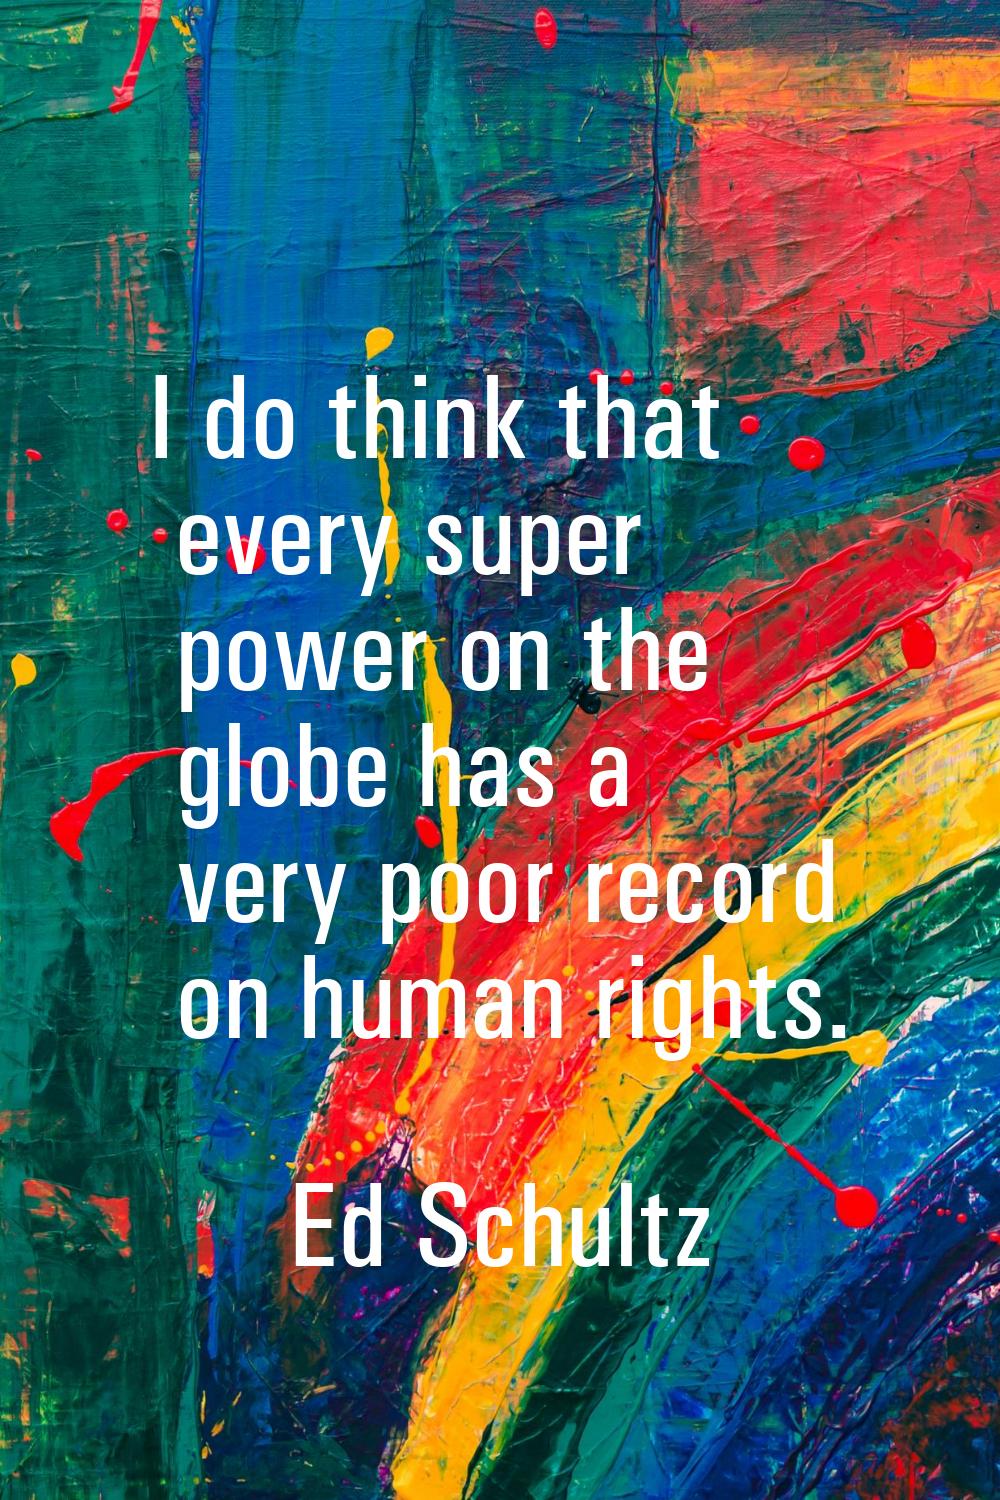 I do think that every super power on the globe has a very poor record on human rights.